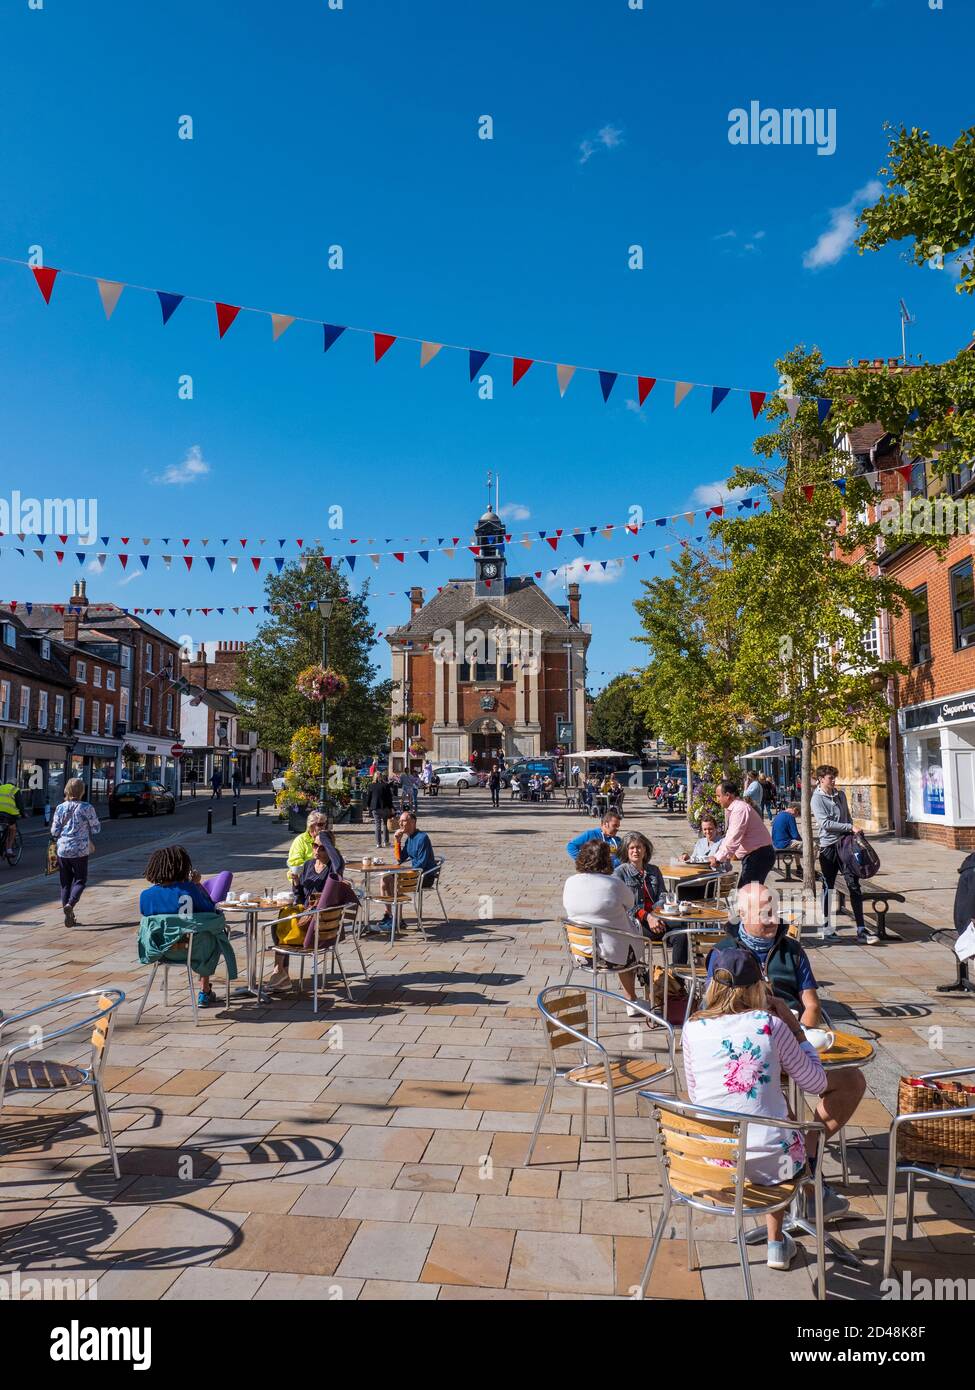 Henley Town Hall, Market Place, with Alfresco Eating, Henley-on-Thames, Oxfordshire, England, UK, GB. Stock Photo